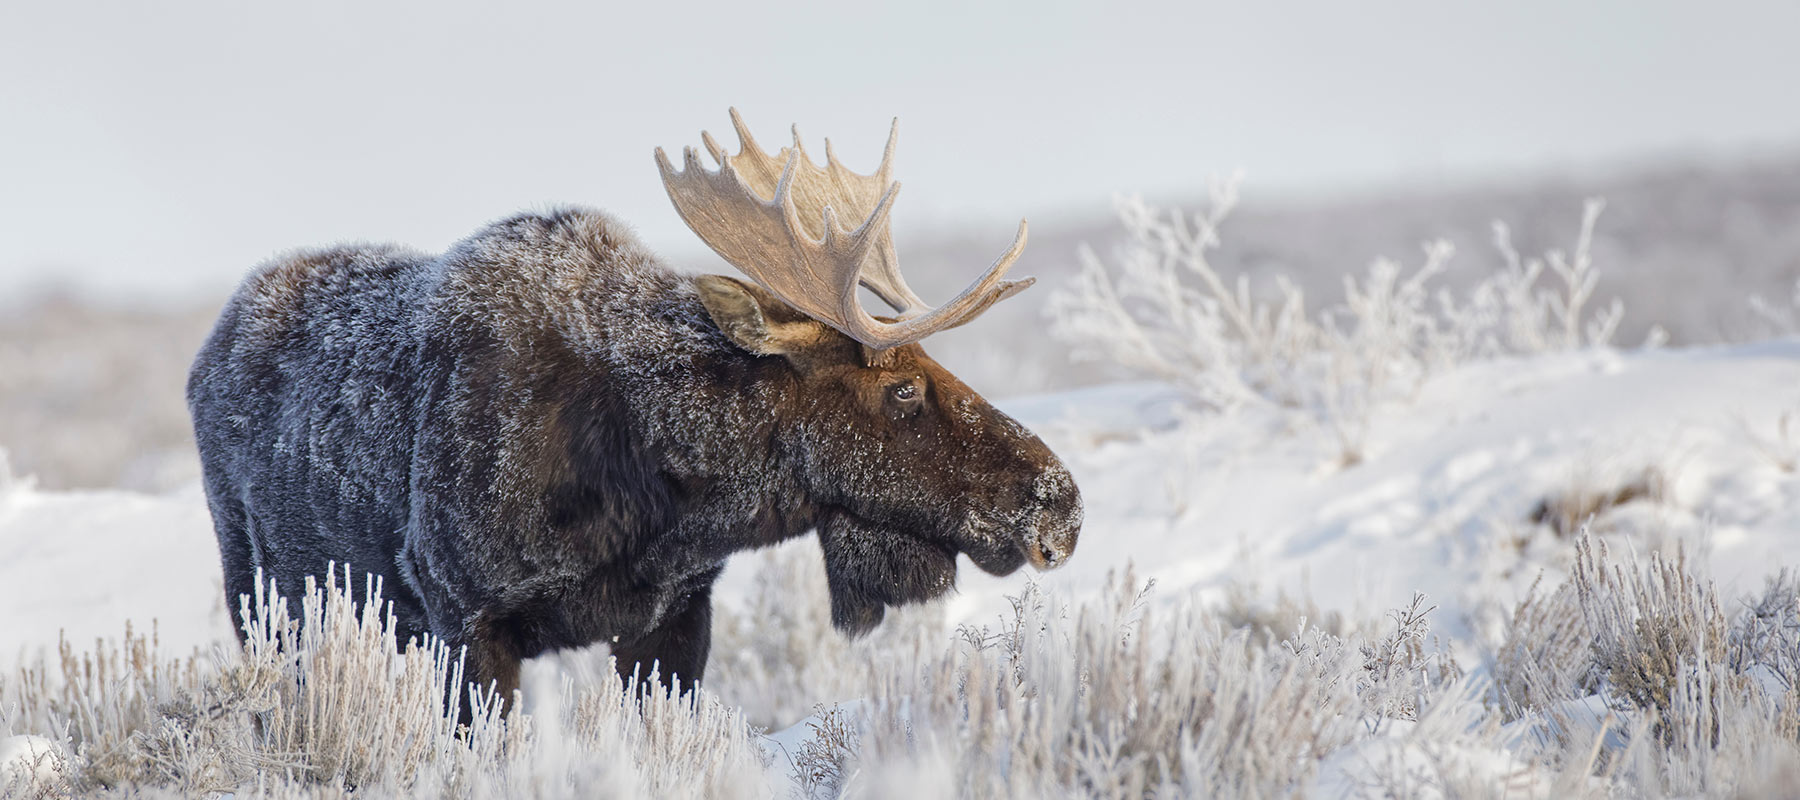 Moose with Frost on Fur During Grand Teton Winter Wildlife Tour - Hole Hiking Experience